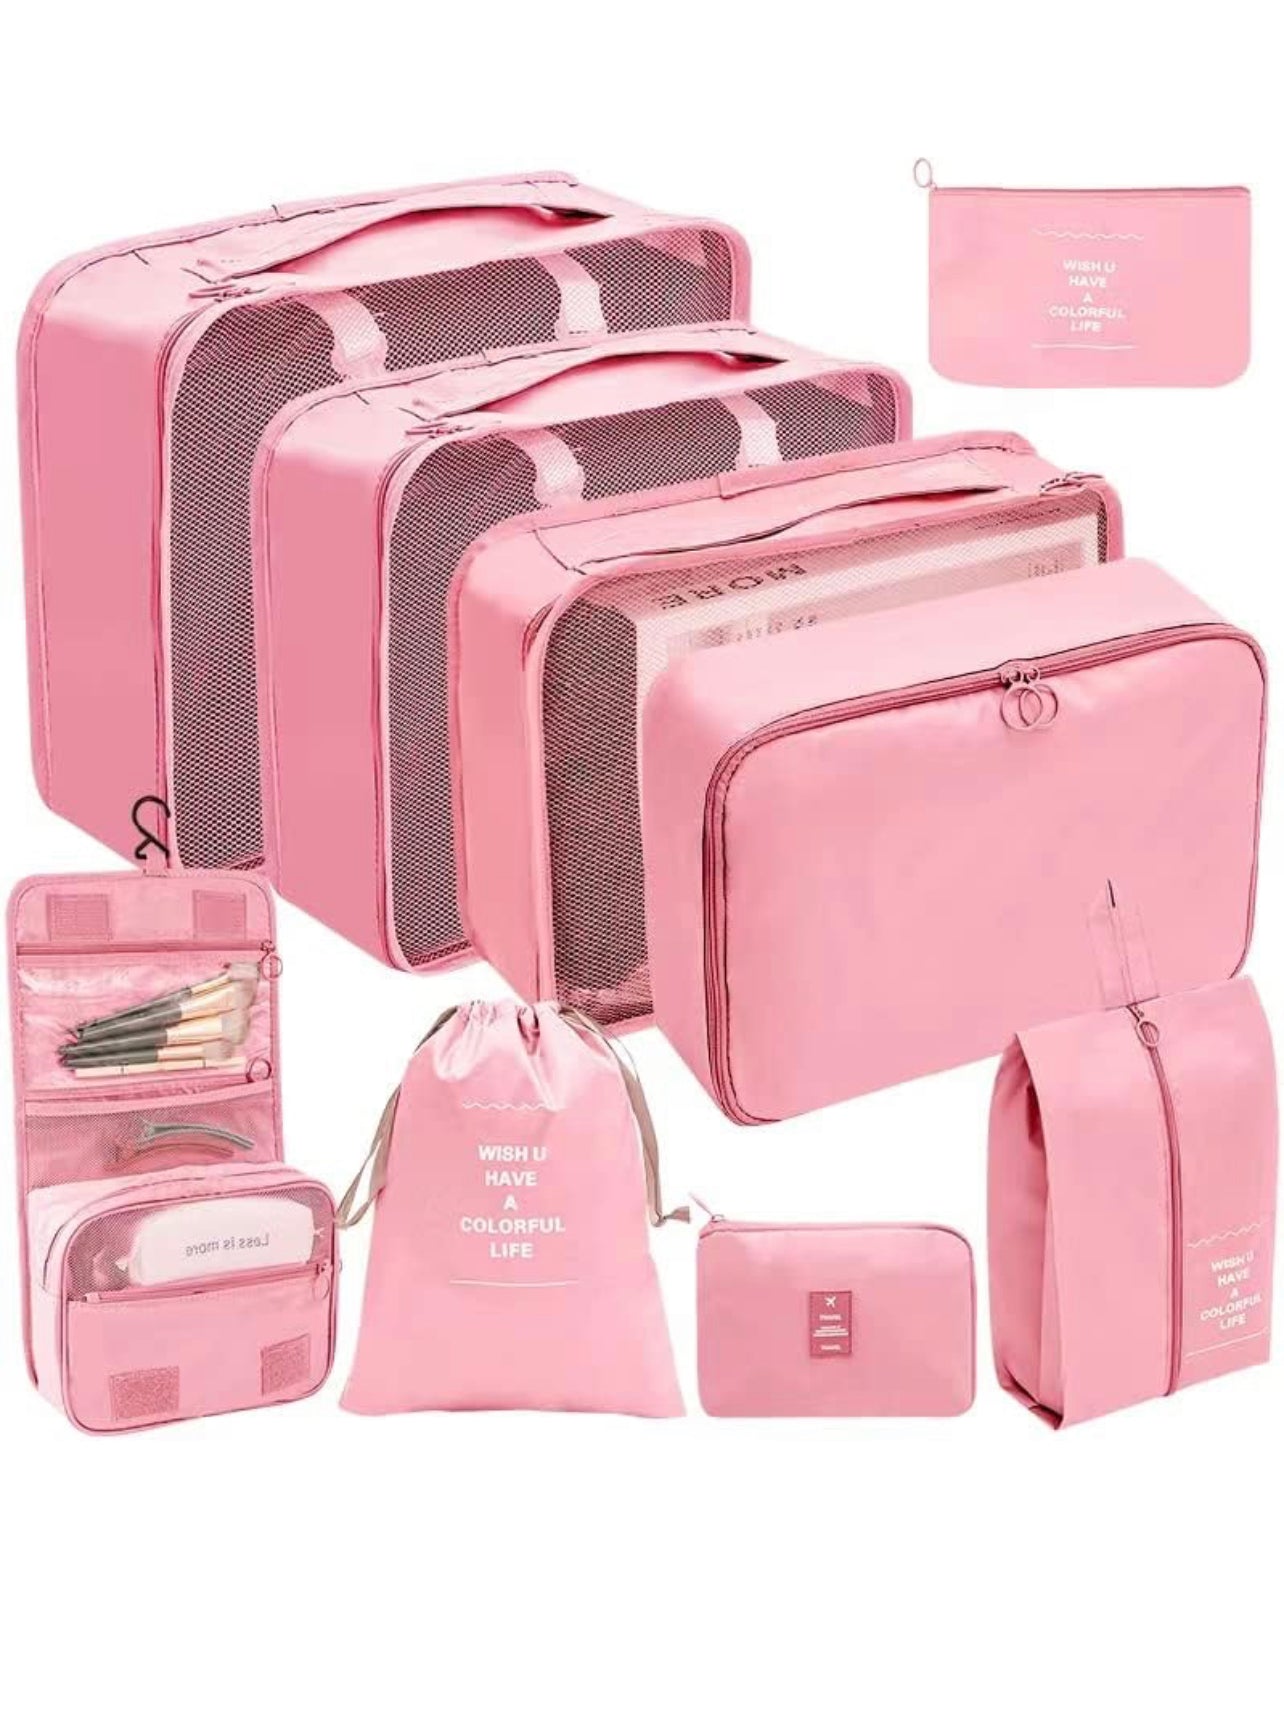 Packing Cubes for Suitcases, 9 Set - Luggage Organizers Suitcase Travel Accessories (Pink or Black) - MyTravelShop.ca